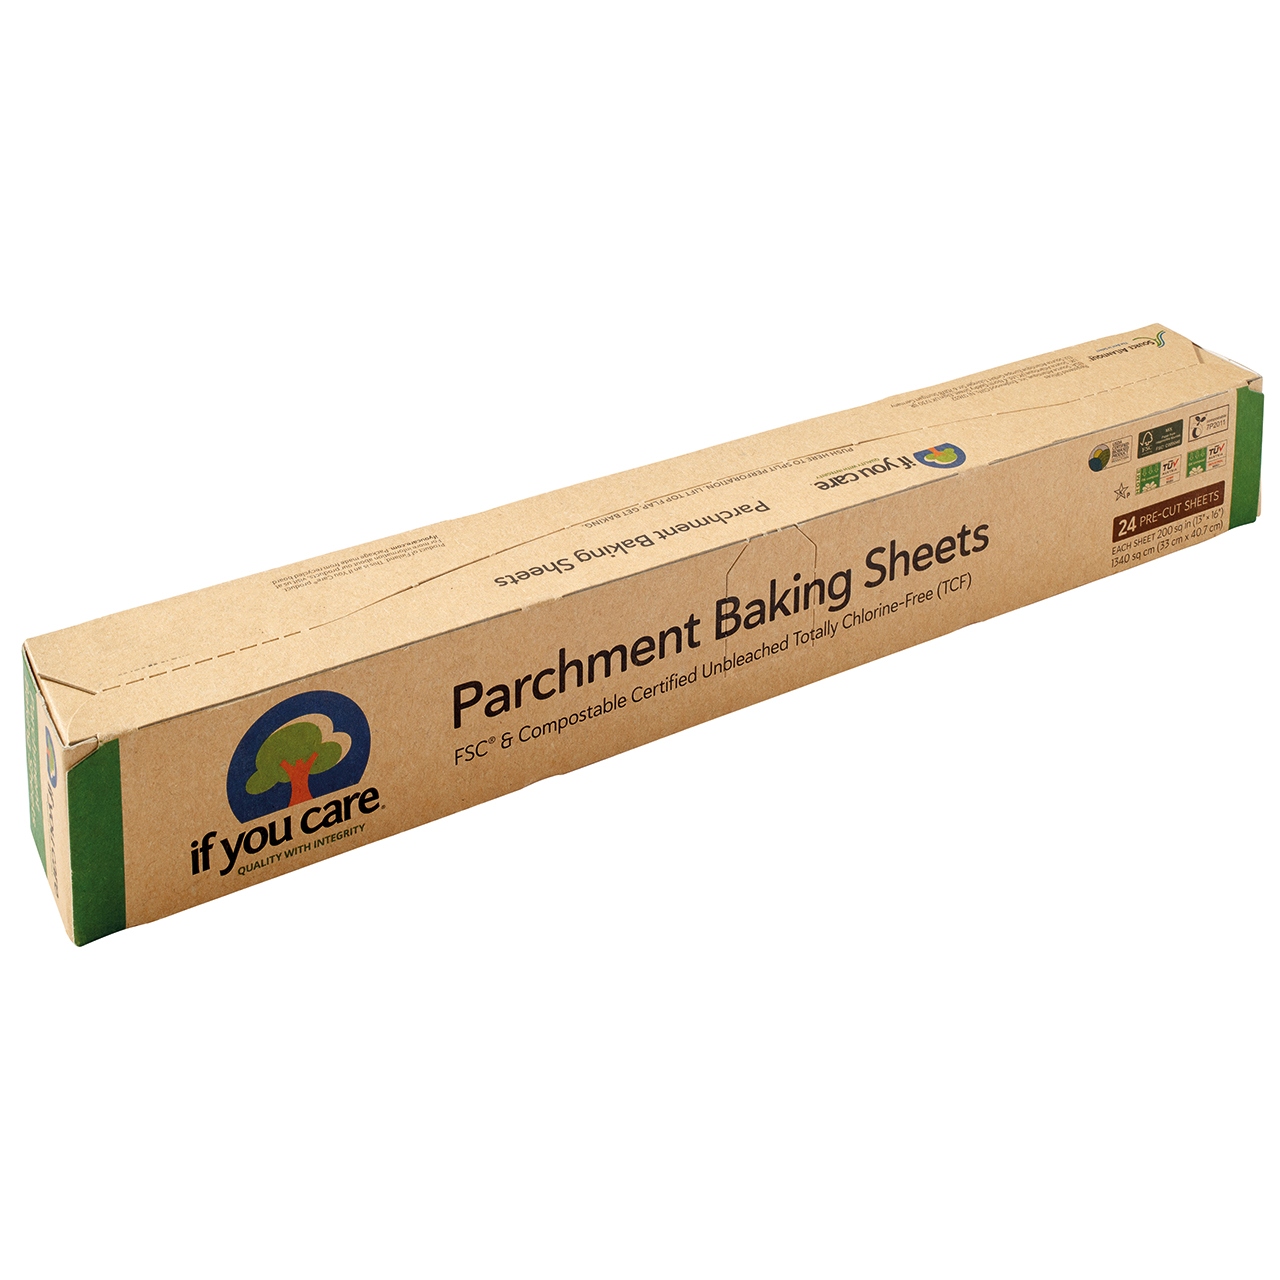 Parchment Baking Sheets - Pack of 2